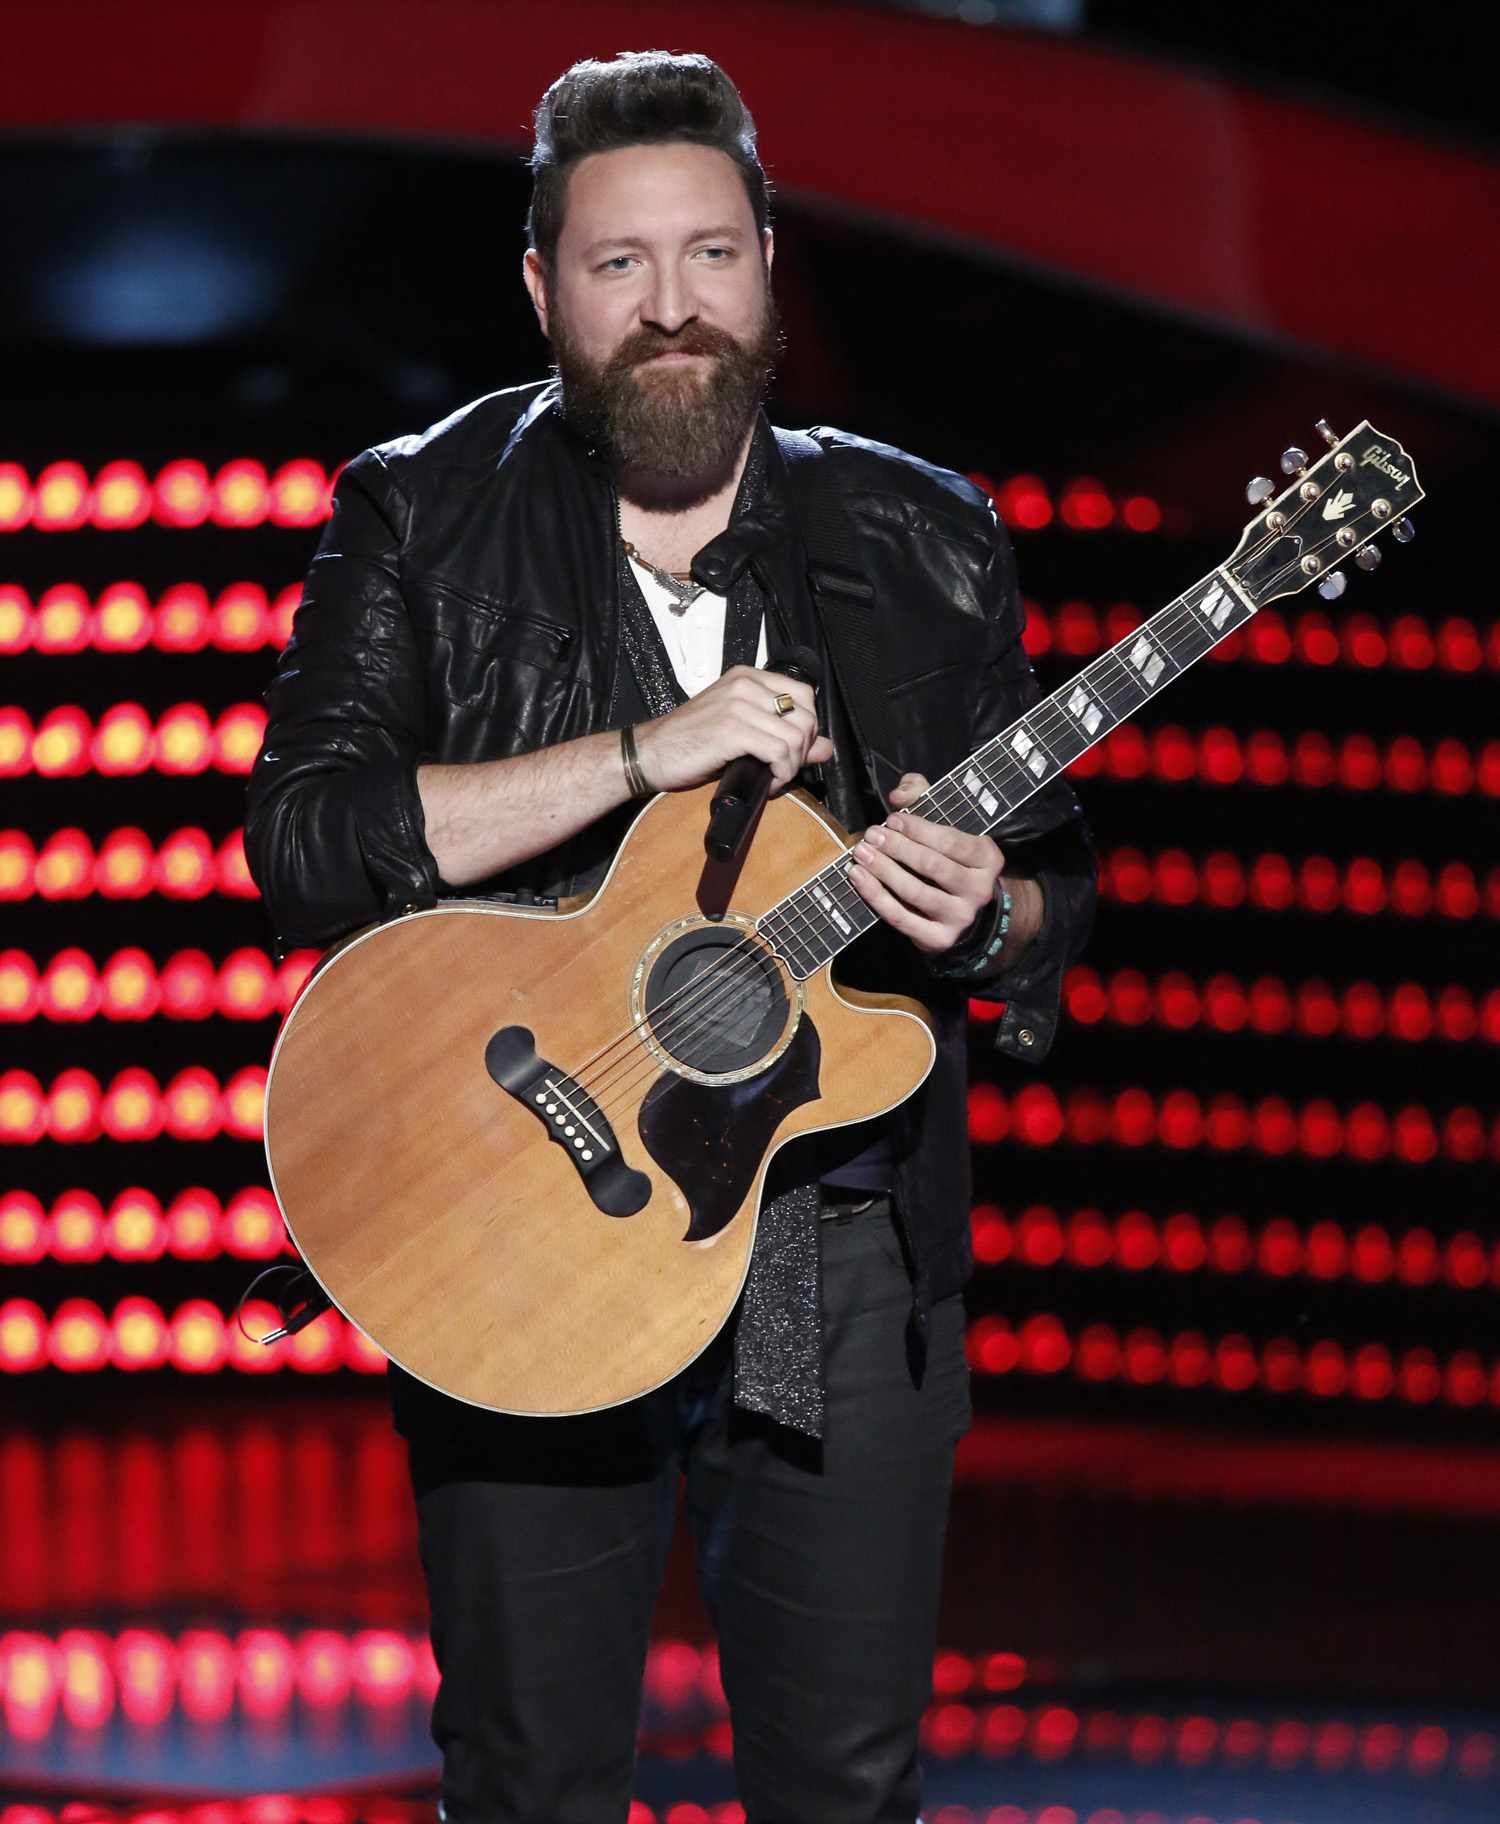 THE VOICE -- "Blind Auditions" -- Pictured: Nolan Neal